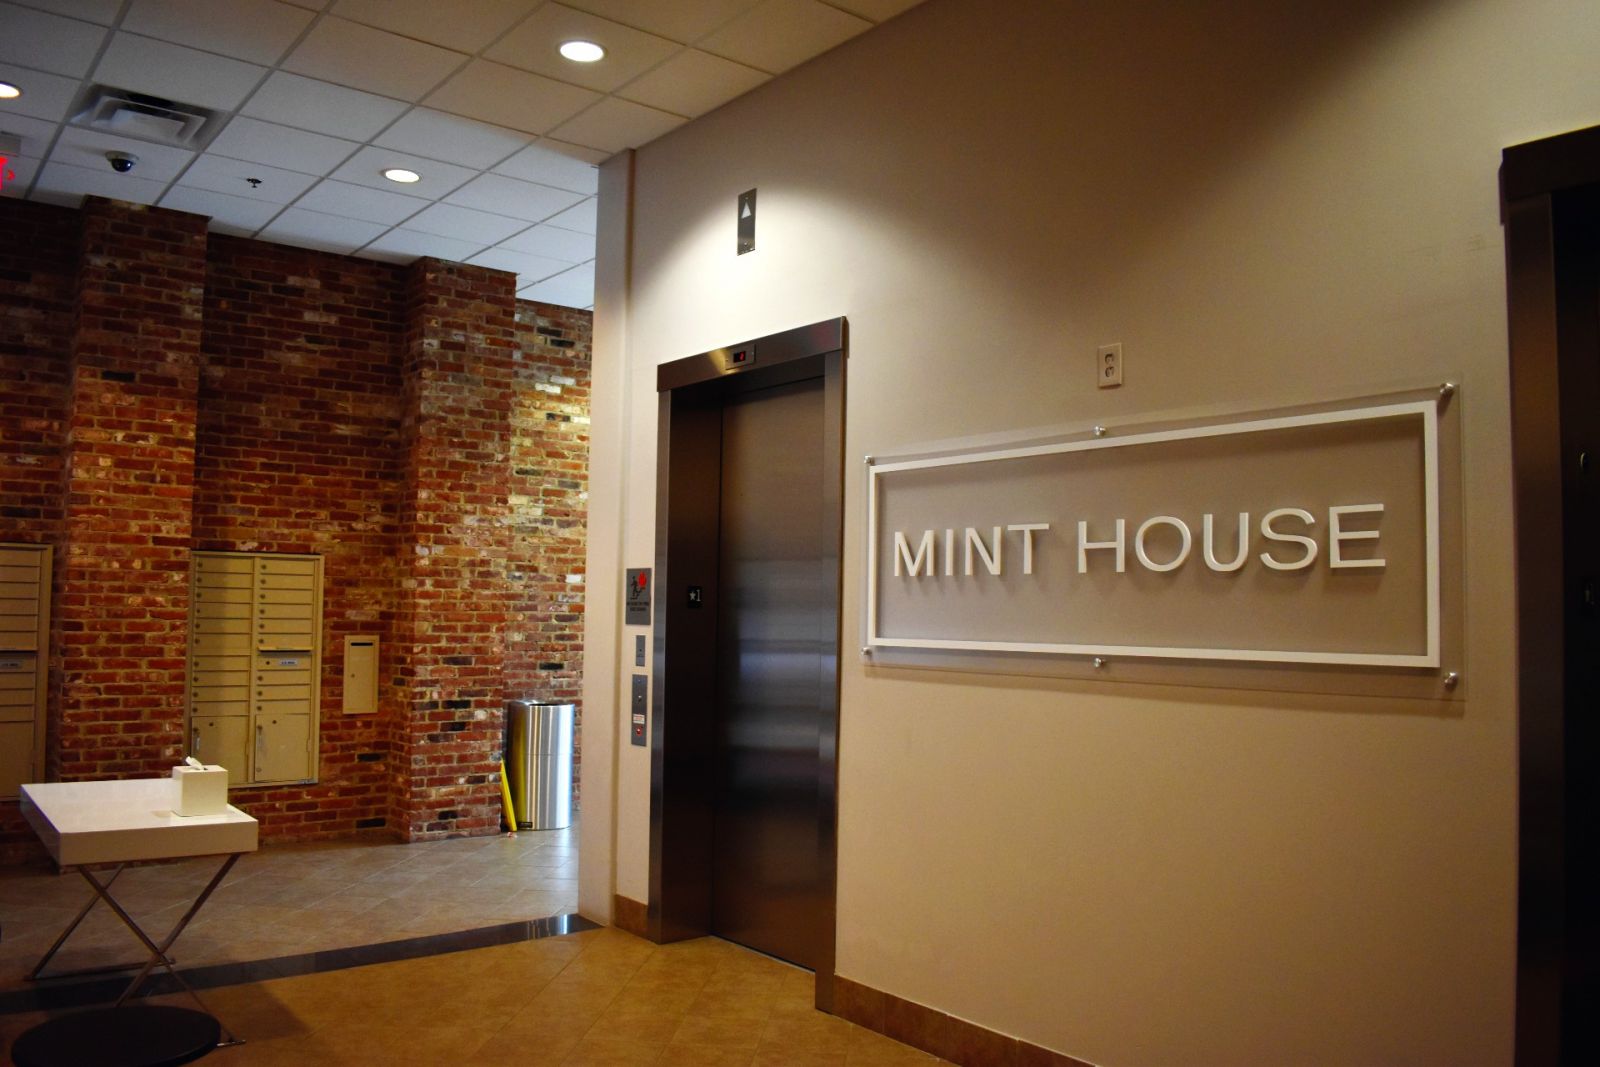 The understated lobby of Mint House in Greenville is striking because of the absence of most things found in a hotel lobby, including employees. (Photo/Molly Hulsey)